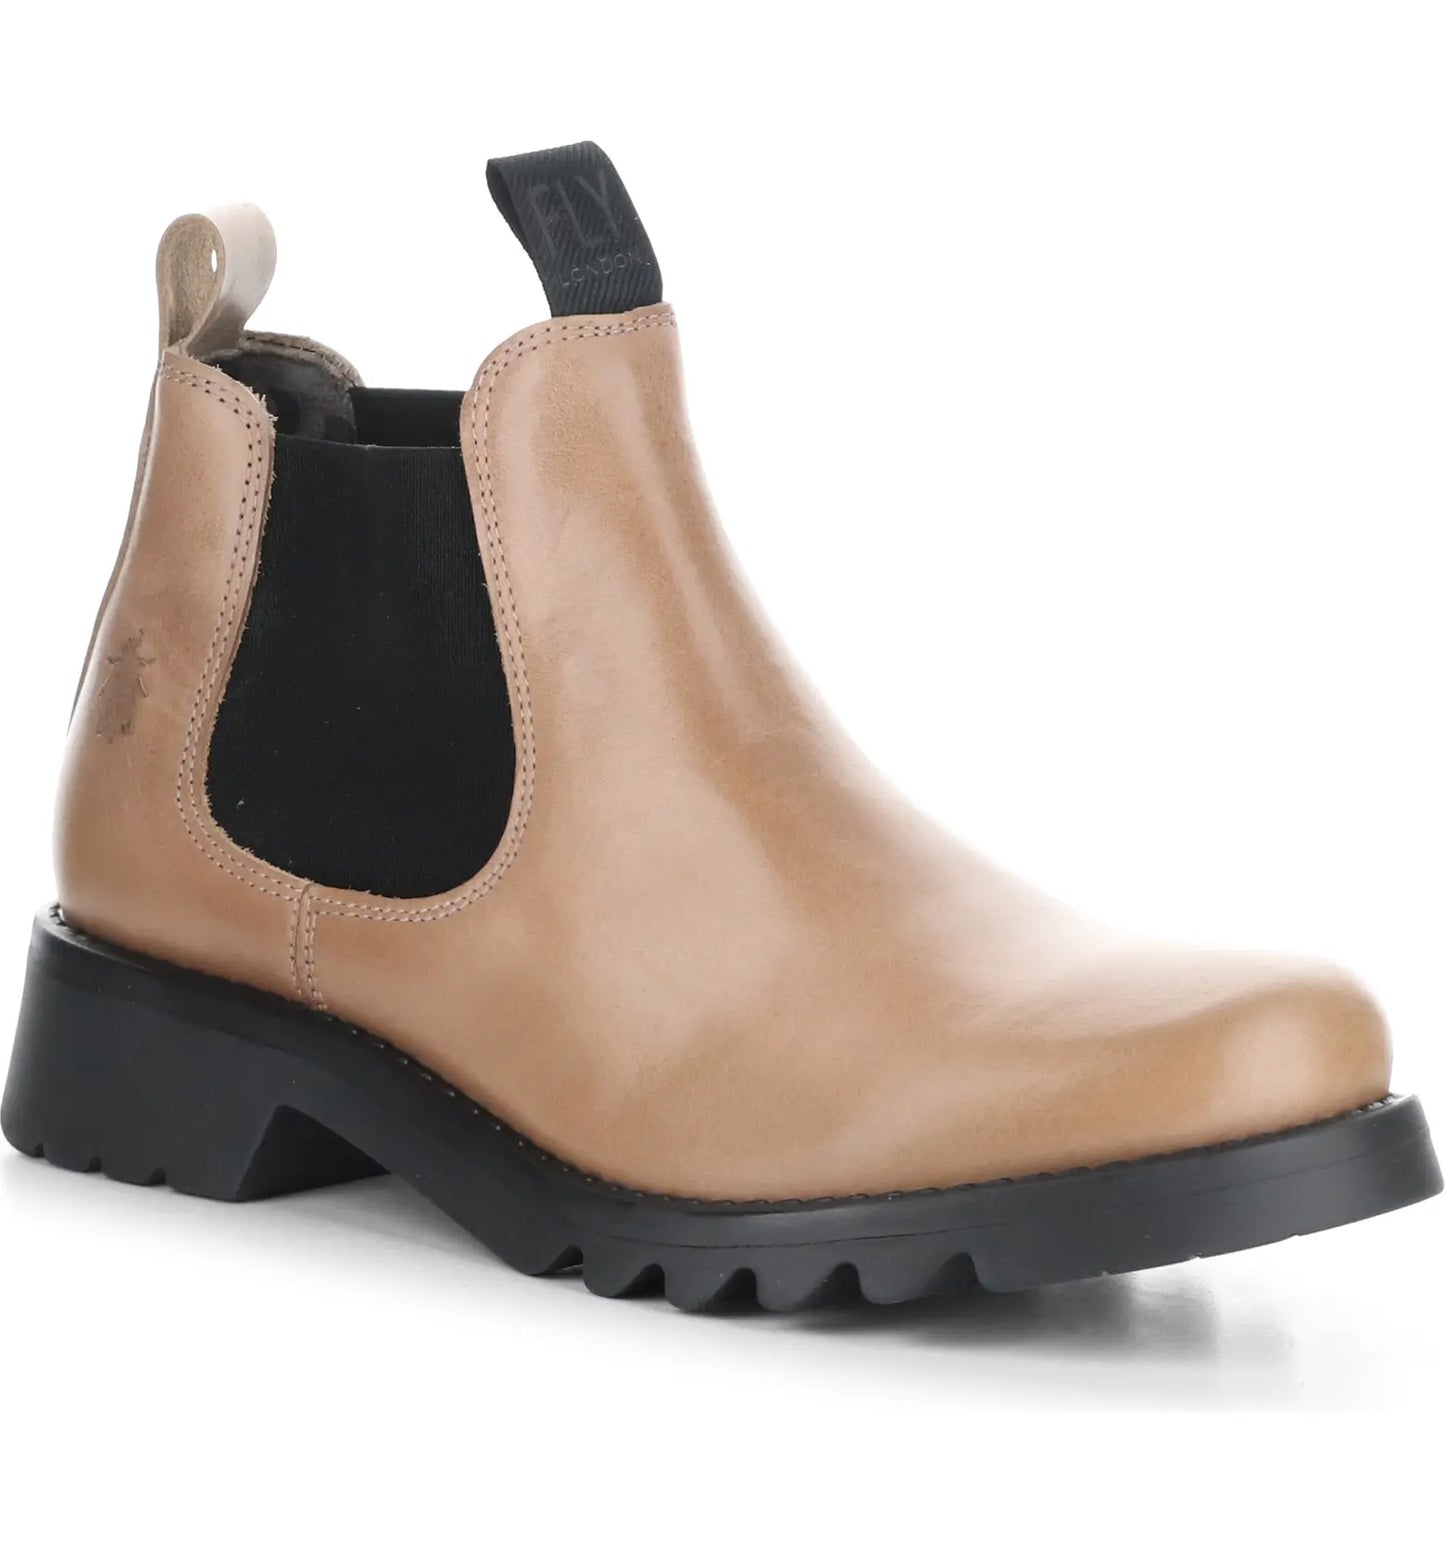 Rika Boot by Fly London combines contemporary styling with a neutral hue for versatile wearability. Crafted with lightweight material and cushioned rubber soles, it ensures prolonged comfort.